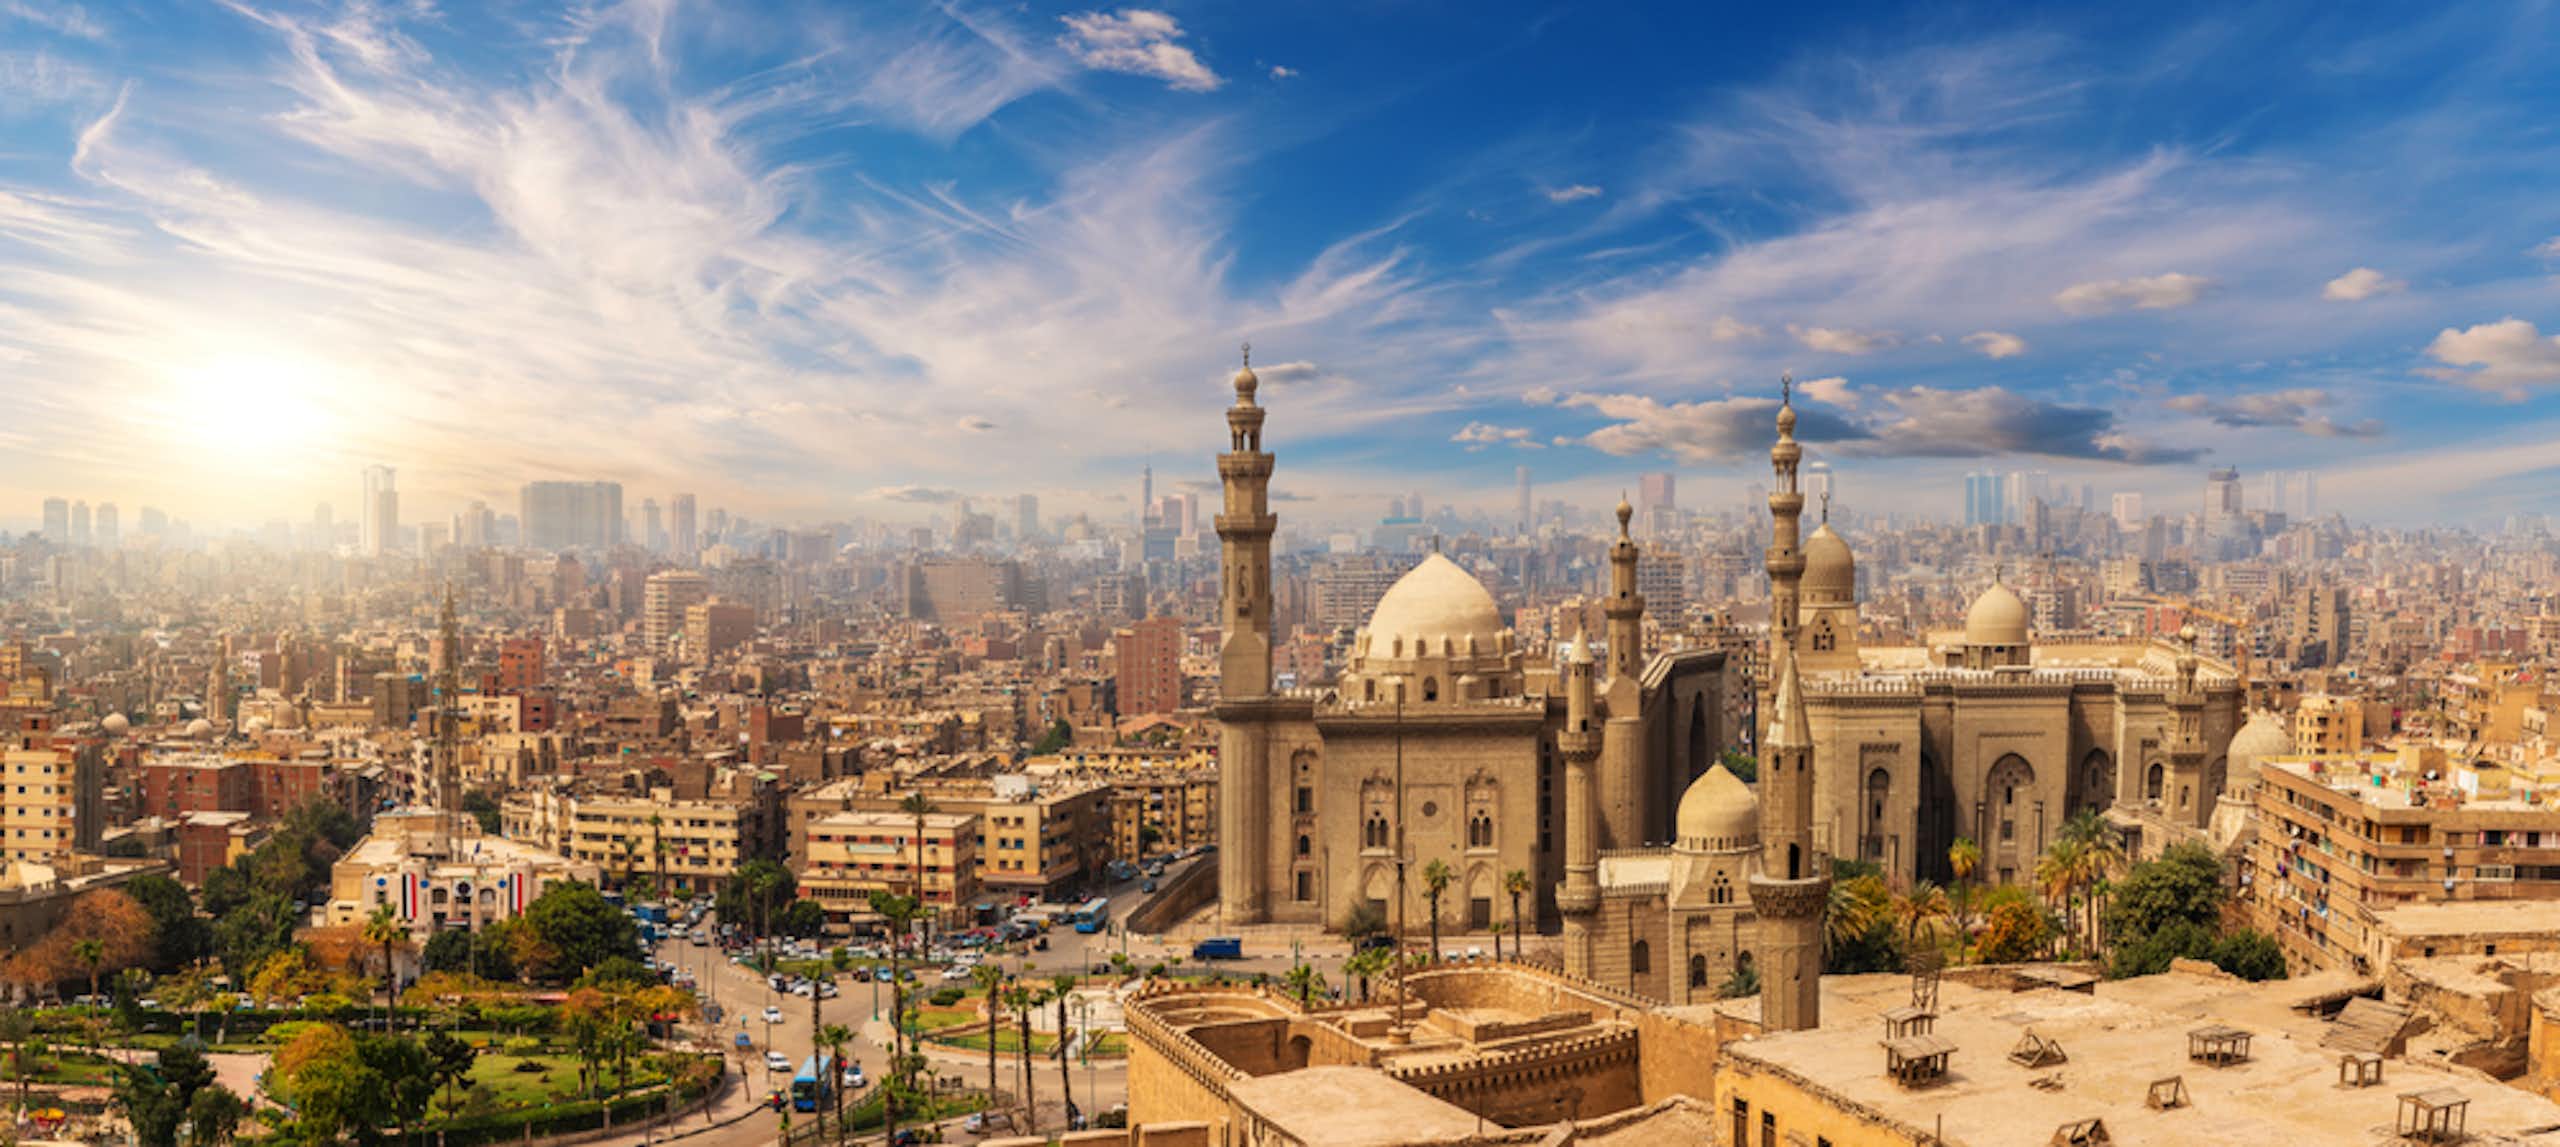 The city of Cairo, with very few trees, and a blazing sun